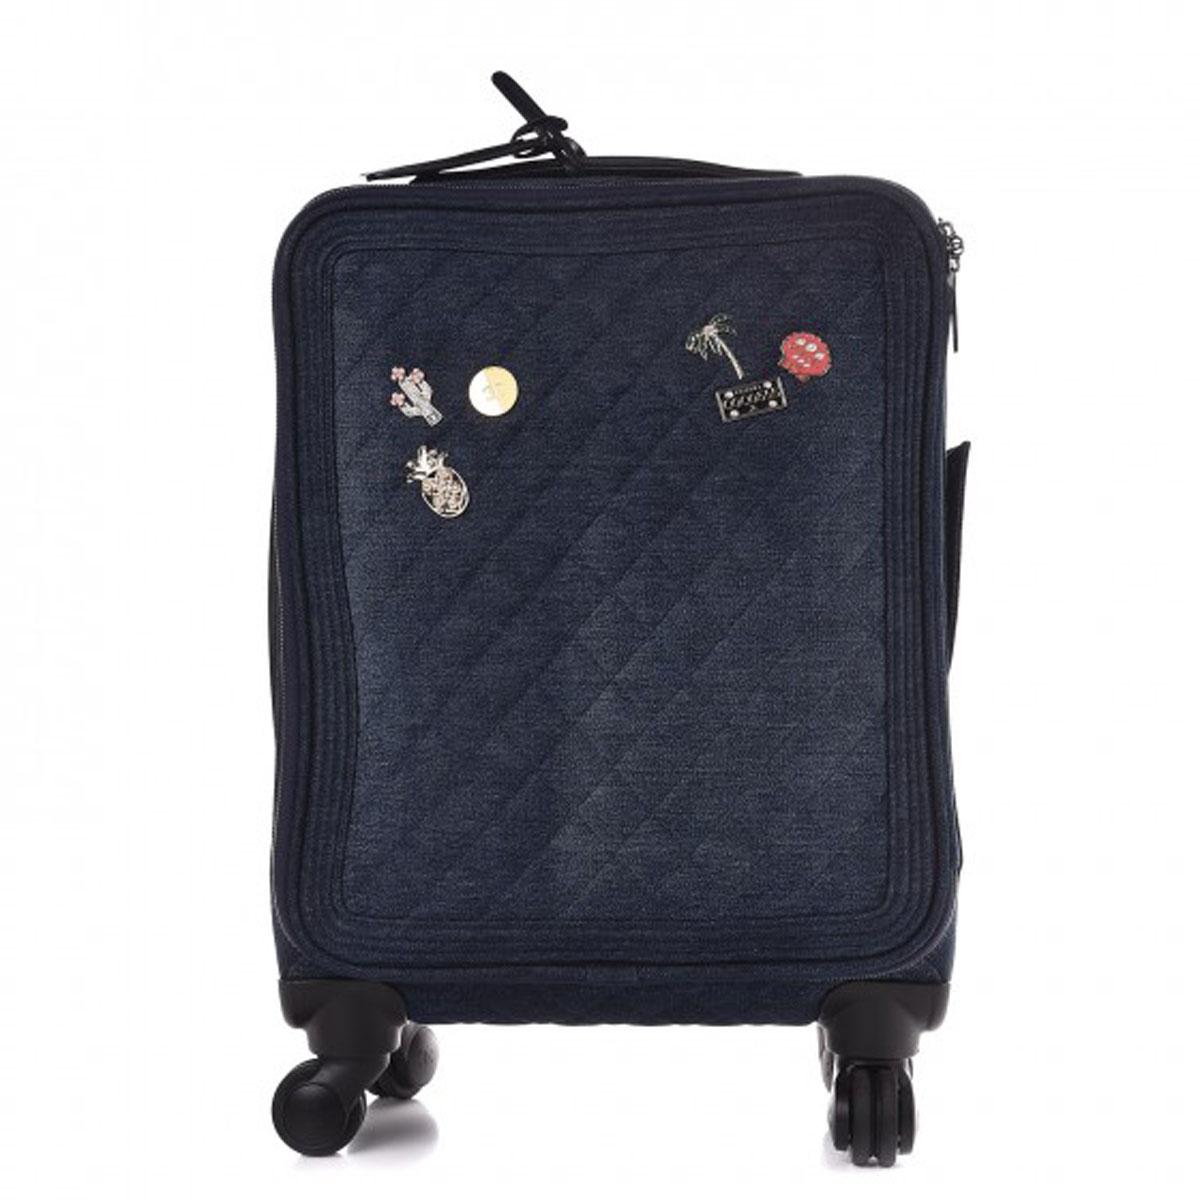 Chanel Coco Charm Denim Trolley Travel Luggage Rolling Carry On

Chanel Cruise 2017
Dark wash blue denim
Silver-tone hardware
Retractable handle dual flat handles at top and side
Wheels at base black Caviar leather trim
Printed woven lining, three